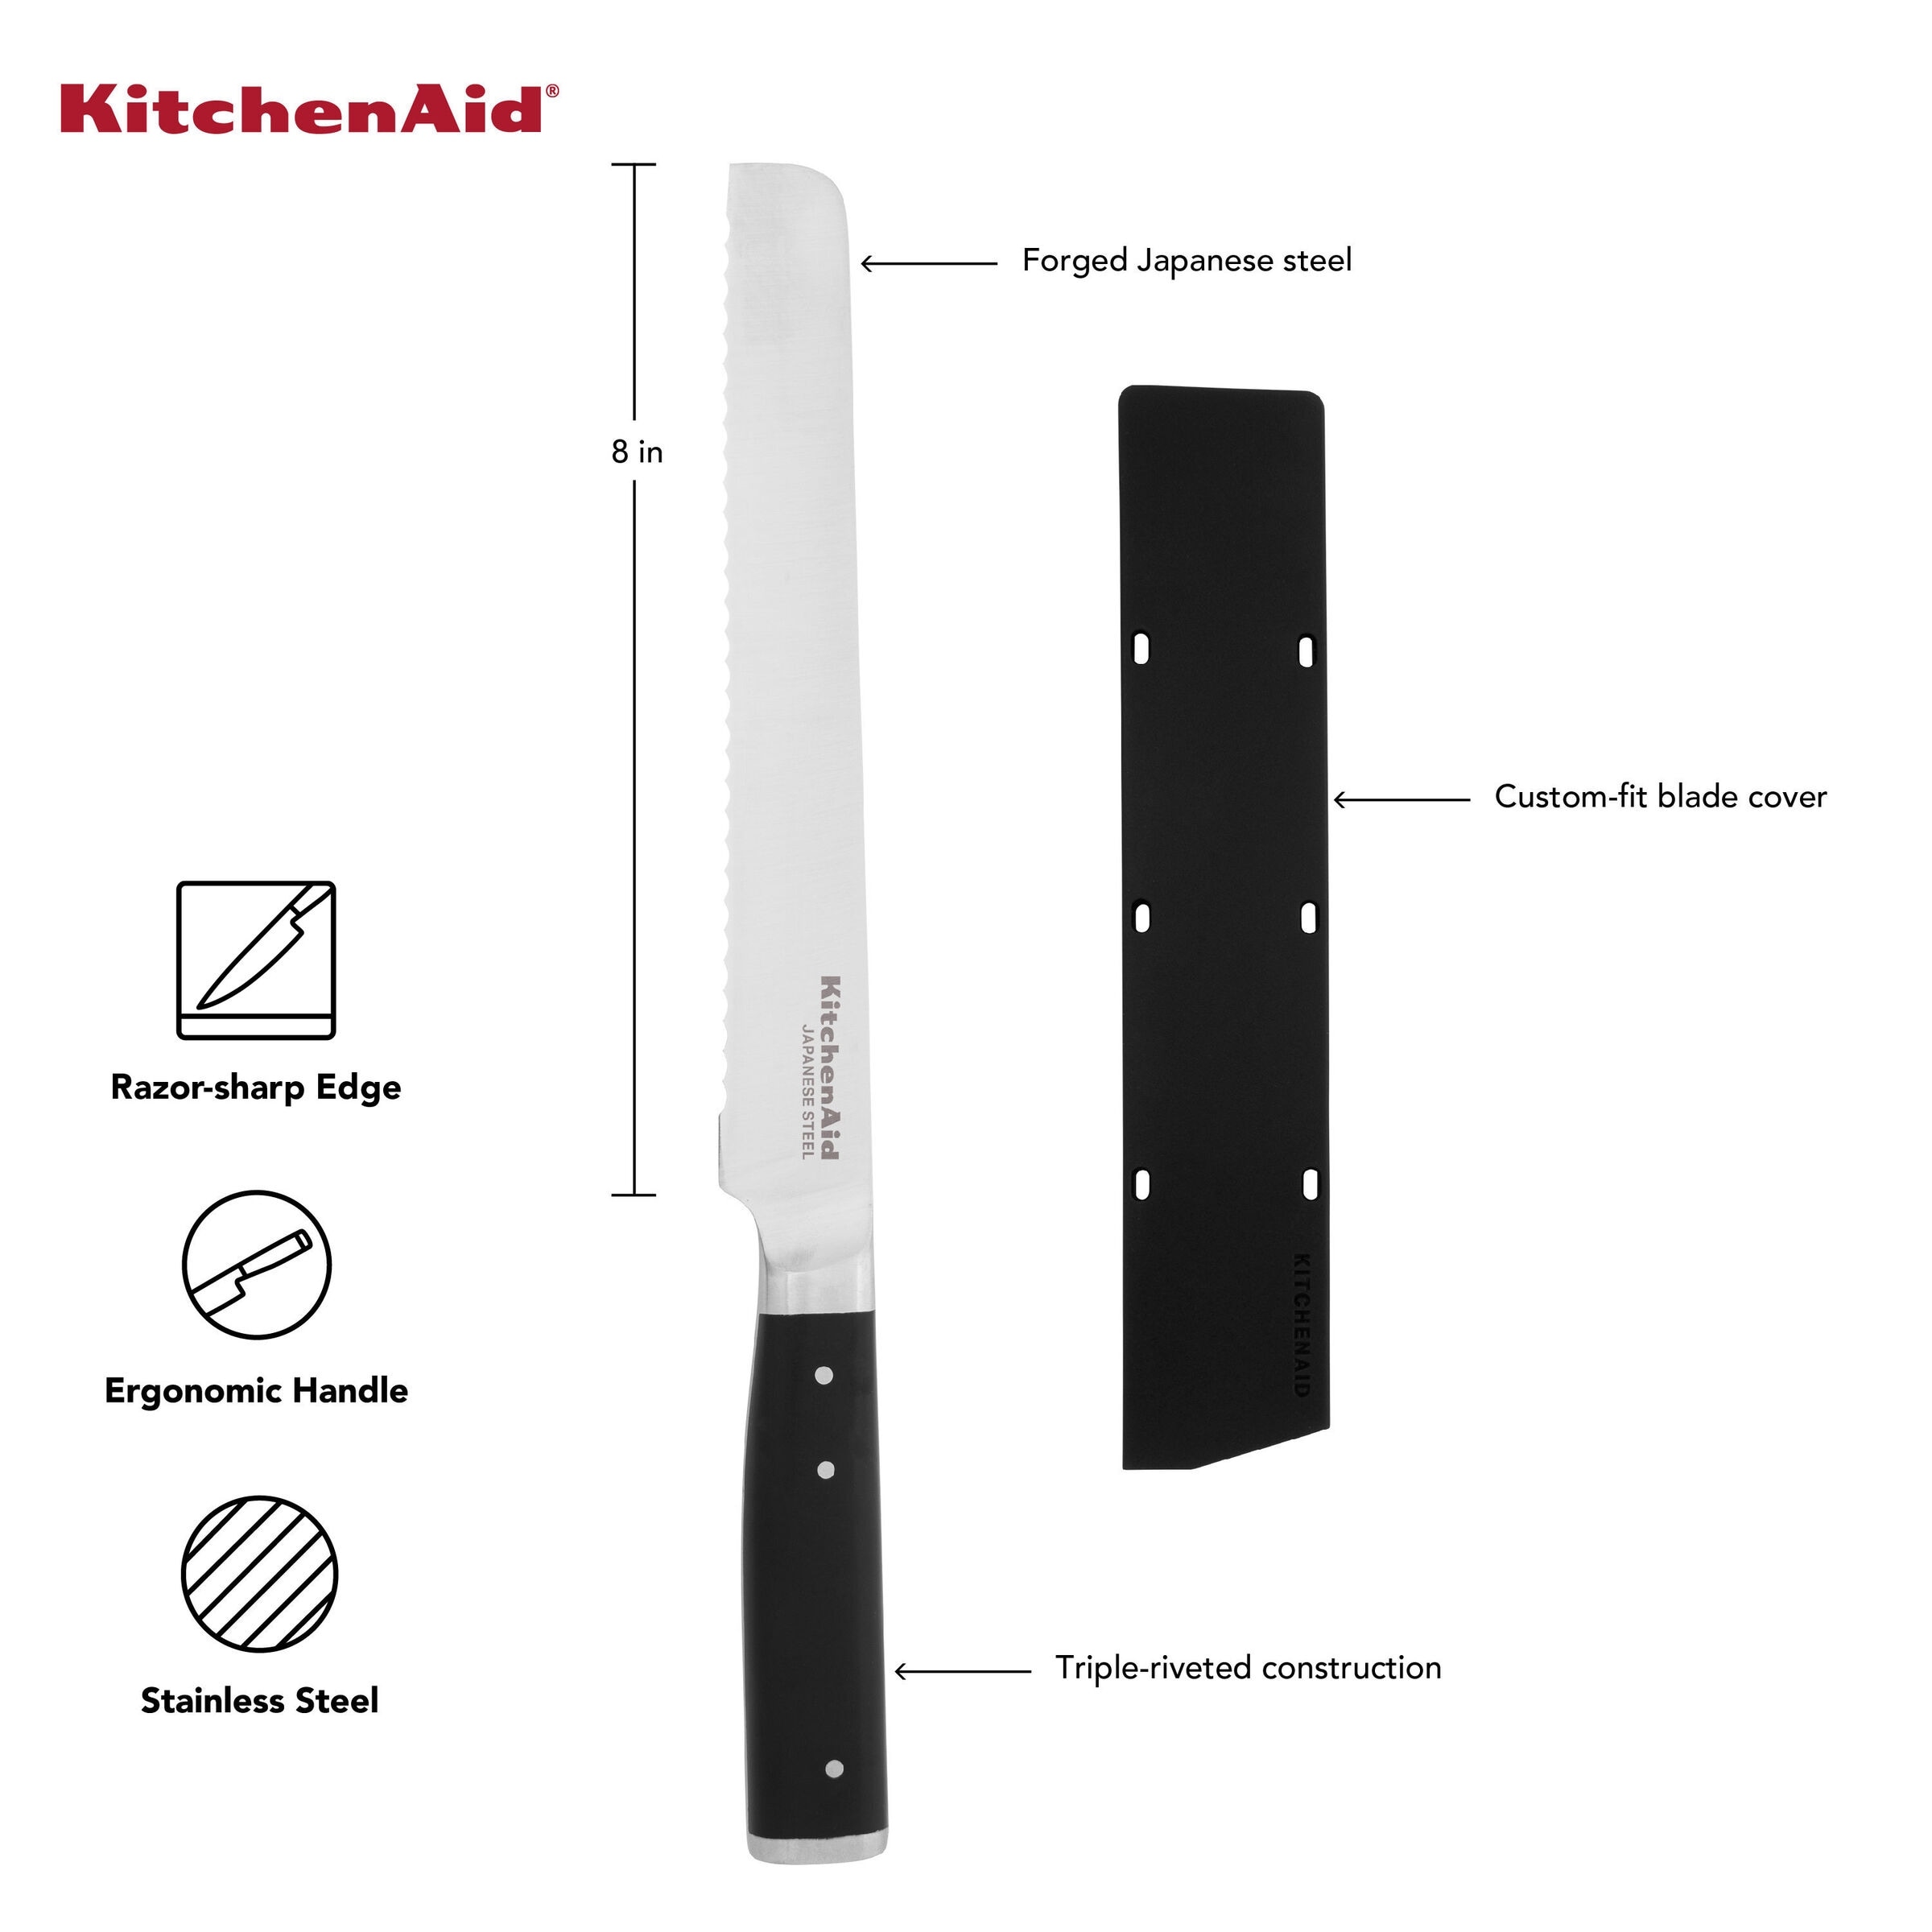 https://ak1.ostkcdn.com/images/products/is/images/direct/c6c85f56125fa25e09d4c47afba642a5a3f3a7b5/KitchenAid-Gourmet-Forged-Bread-Knife%2C-8-Inch%2C-Black.jpg